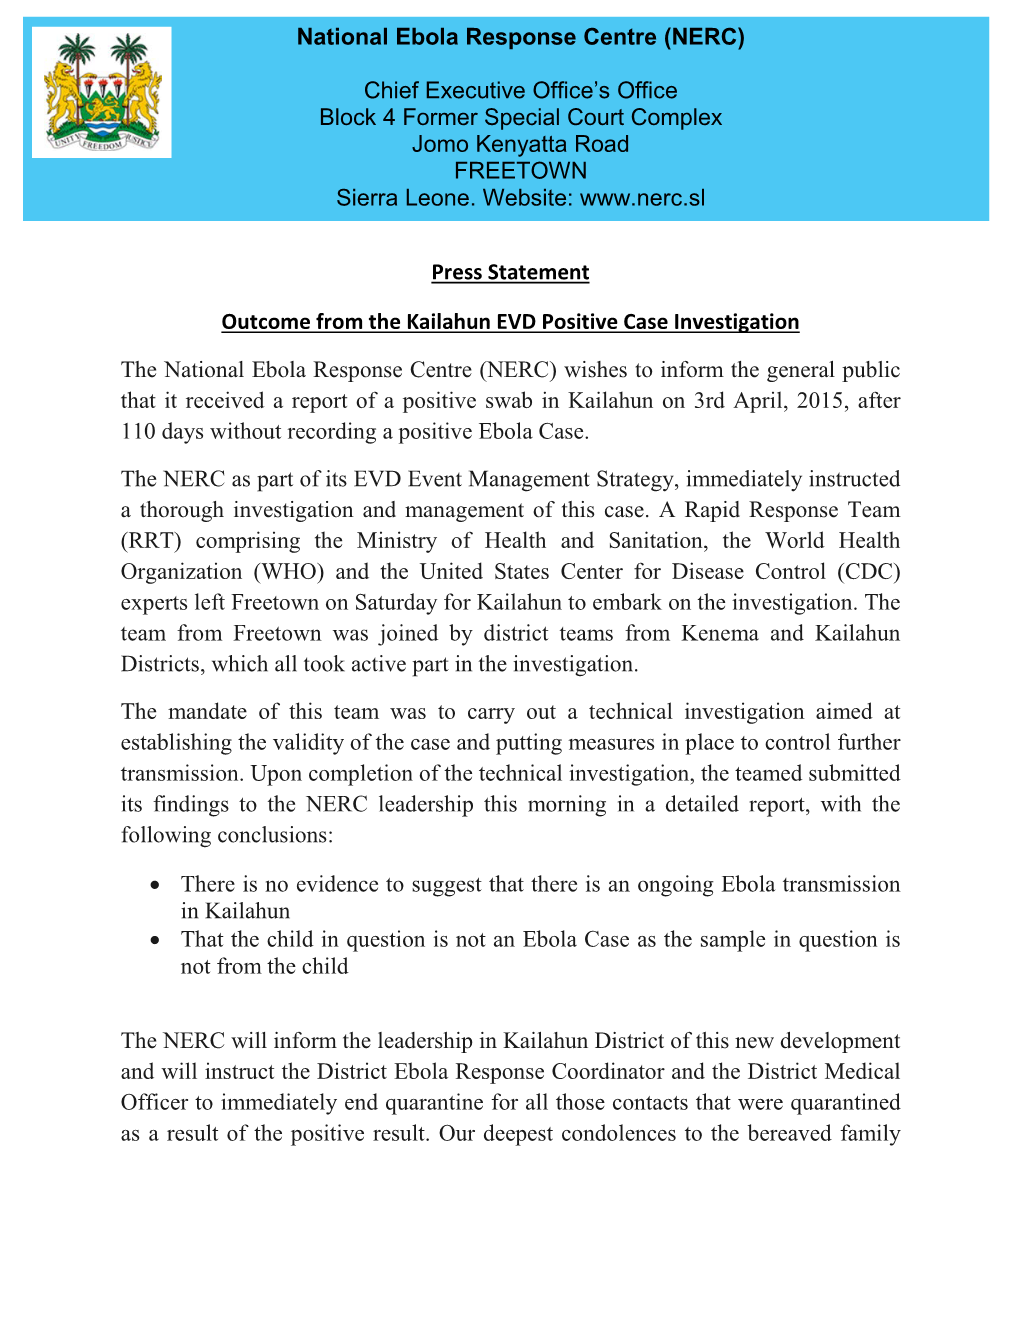 Press Statement Outcome from the Kailahun EVD Positive